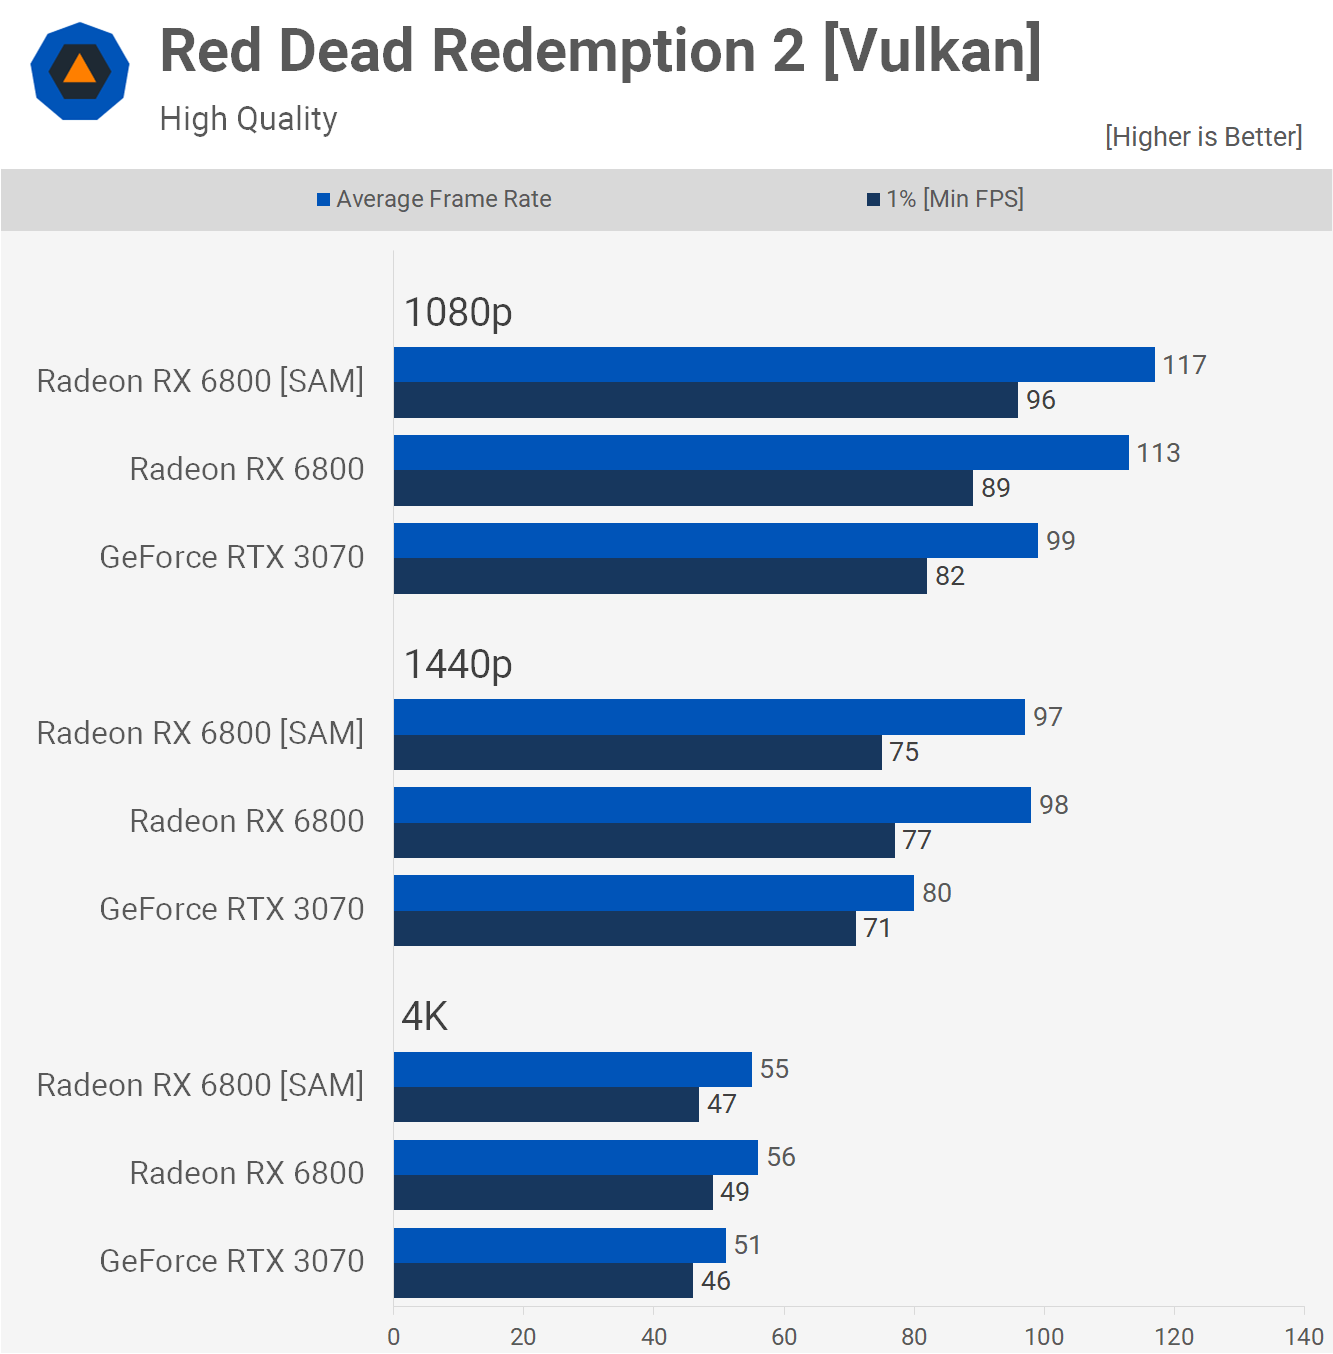 Kết quả benchmark với SAM trong Red Dead Redemption 2